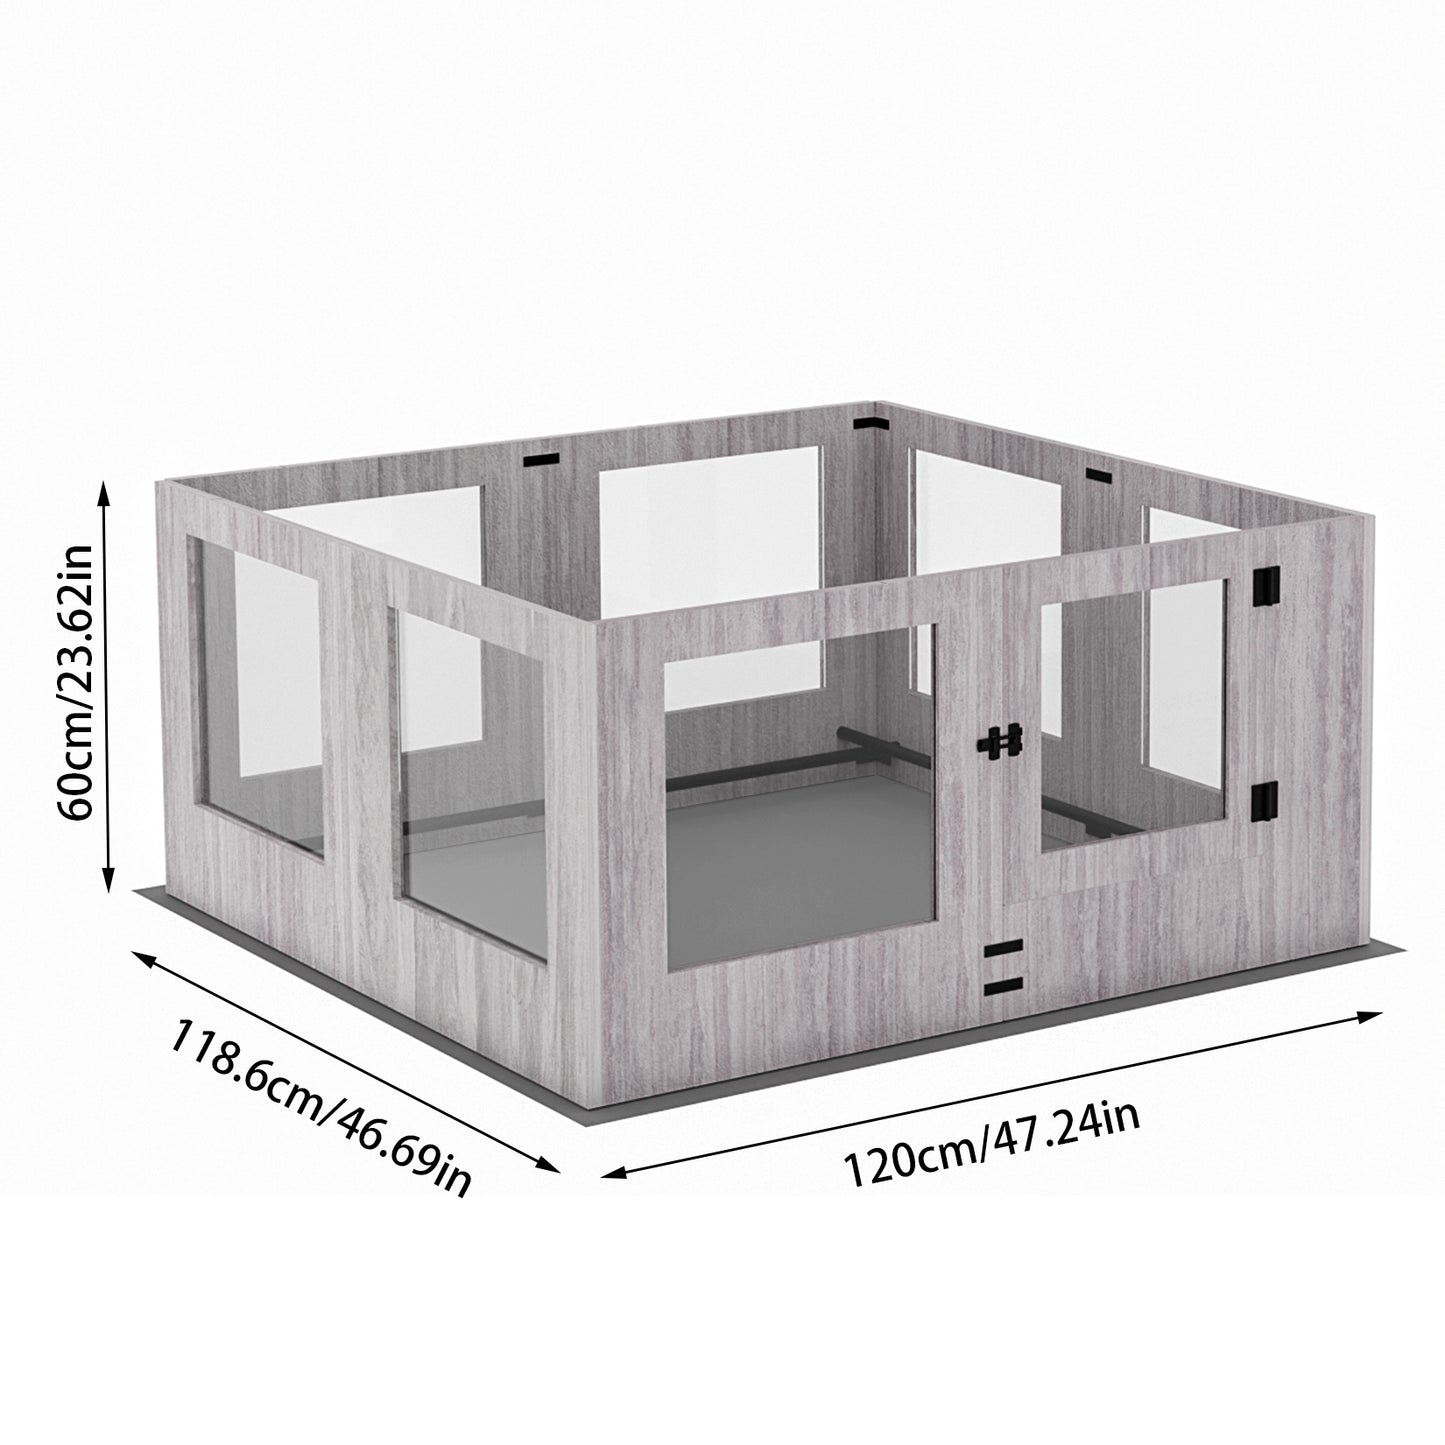 Tempered Glass Dog Playpen: Indoor Pet Whelping Pen Box Protective Ledge Inside Dog Playpen for Newborn Puppies